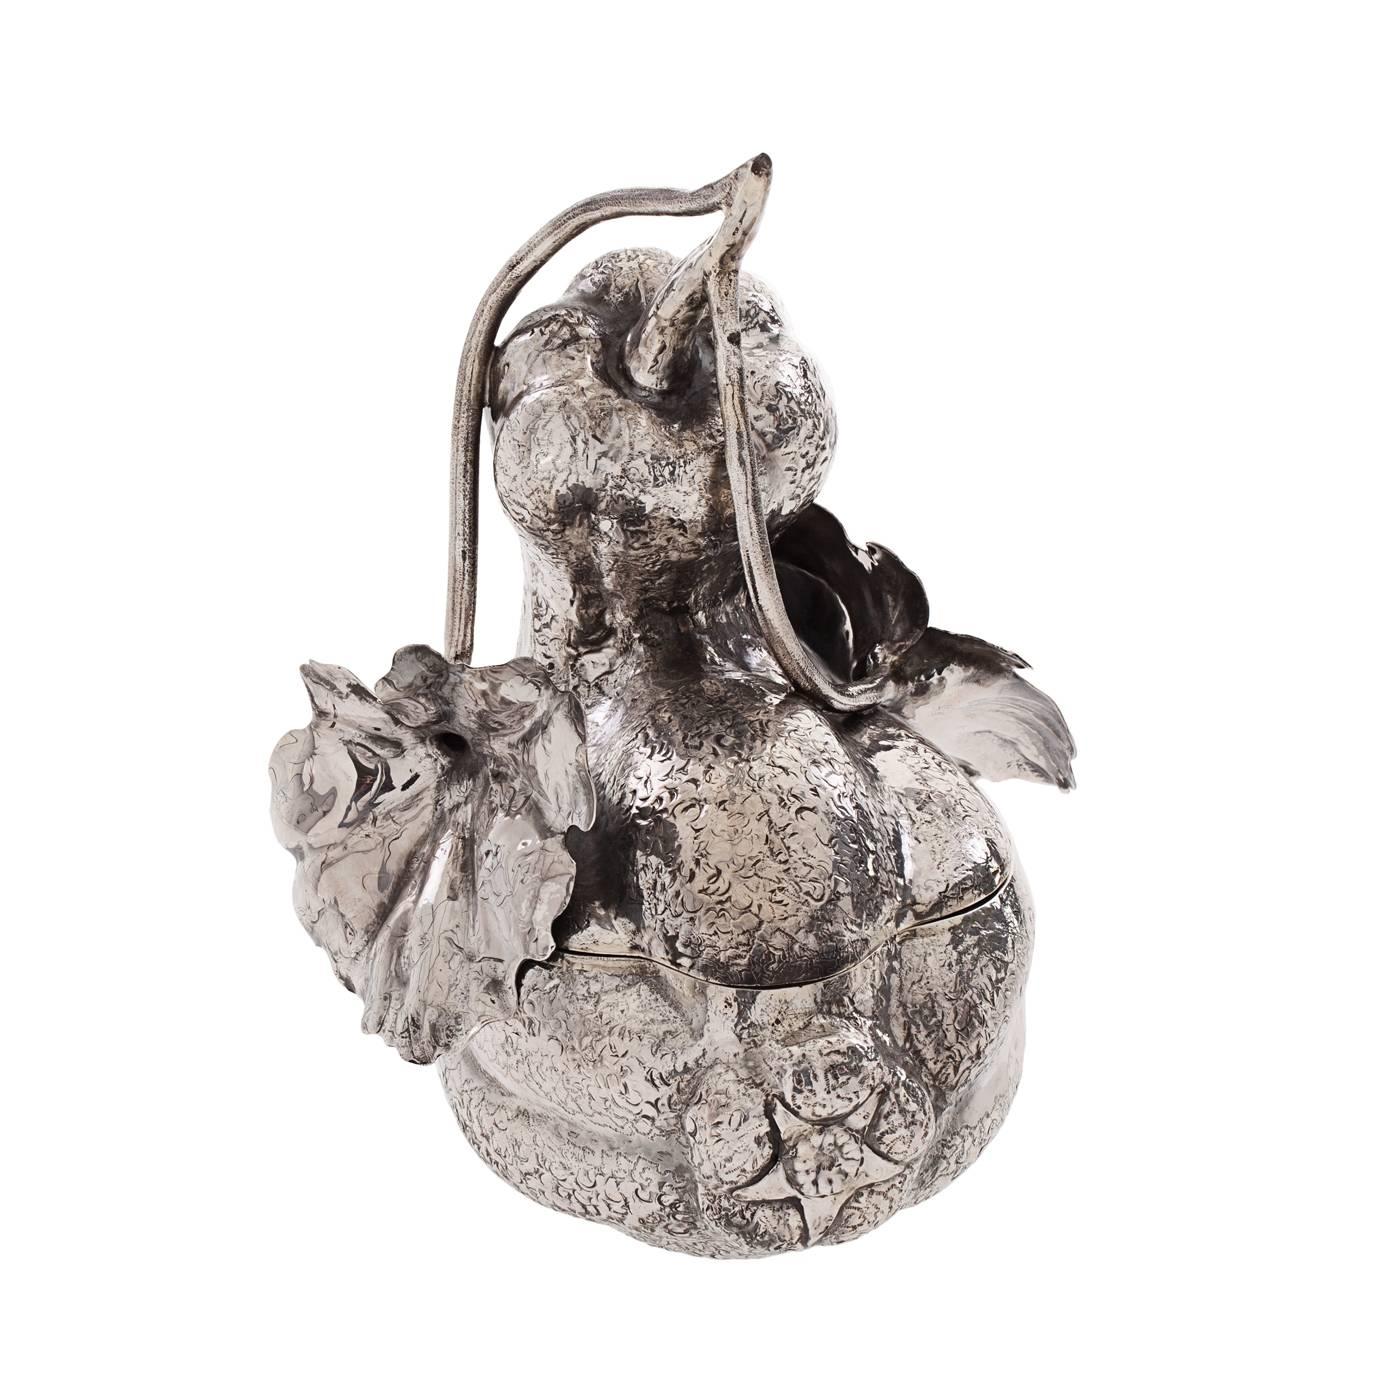 Sterling silver pumpkin-box handcrafted, chiseled and embossed by expert silversmiths, the Lisi Brothers, in Florence. Its dynamic and hyper-realistic quality make it a precious decor piece. The interior has a removable lining for easy and flawless